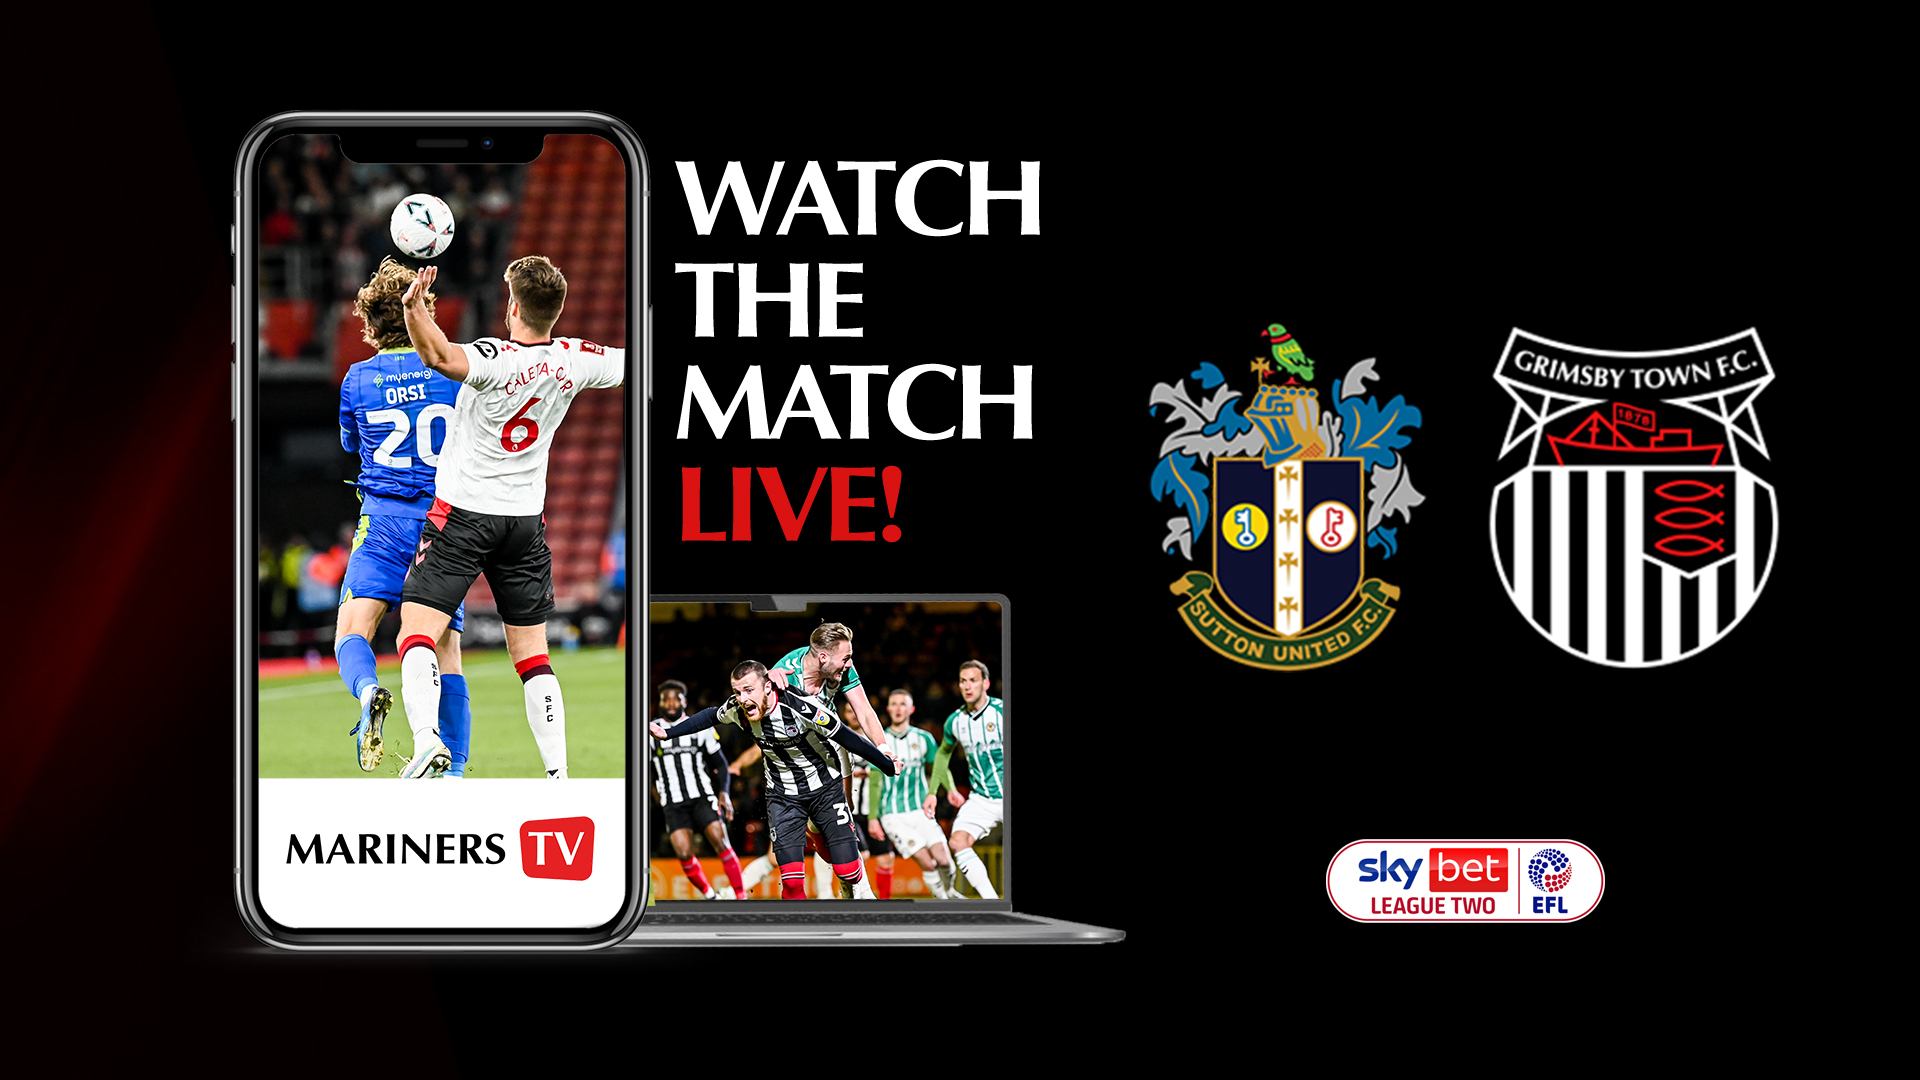 Sutton United match available LIVE on Mariners TV